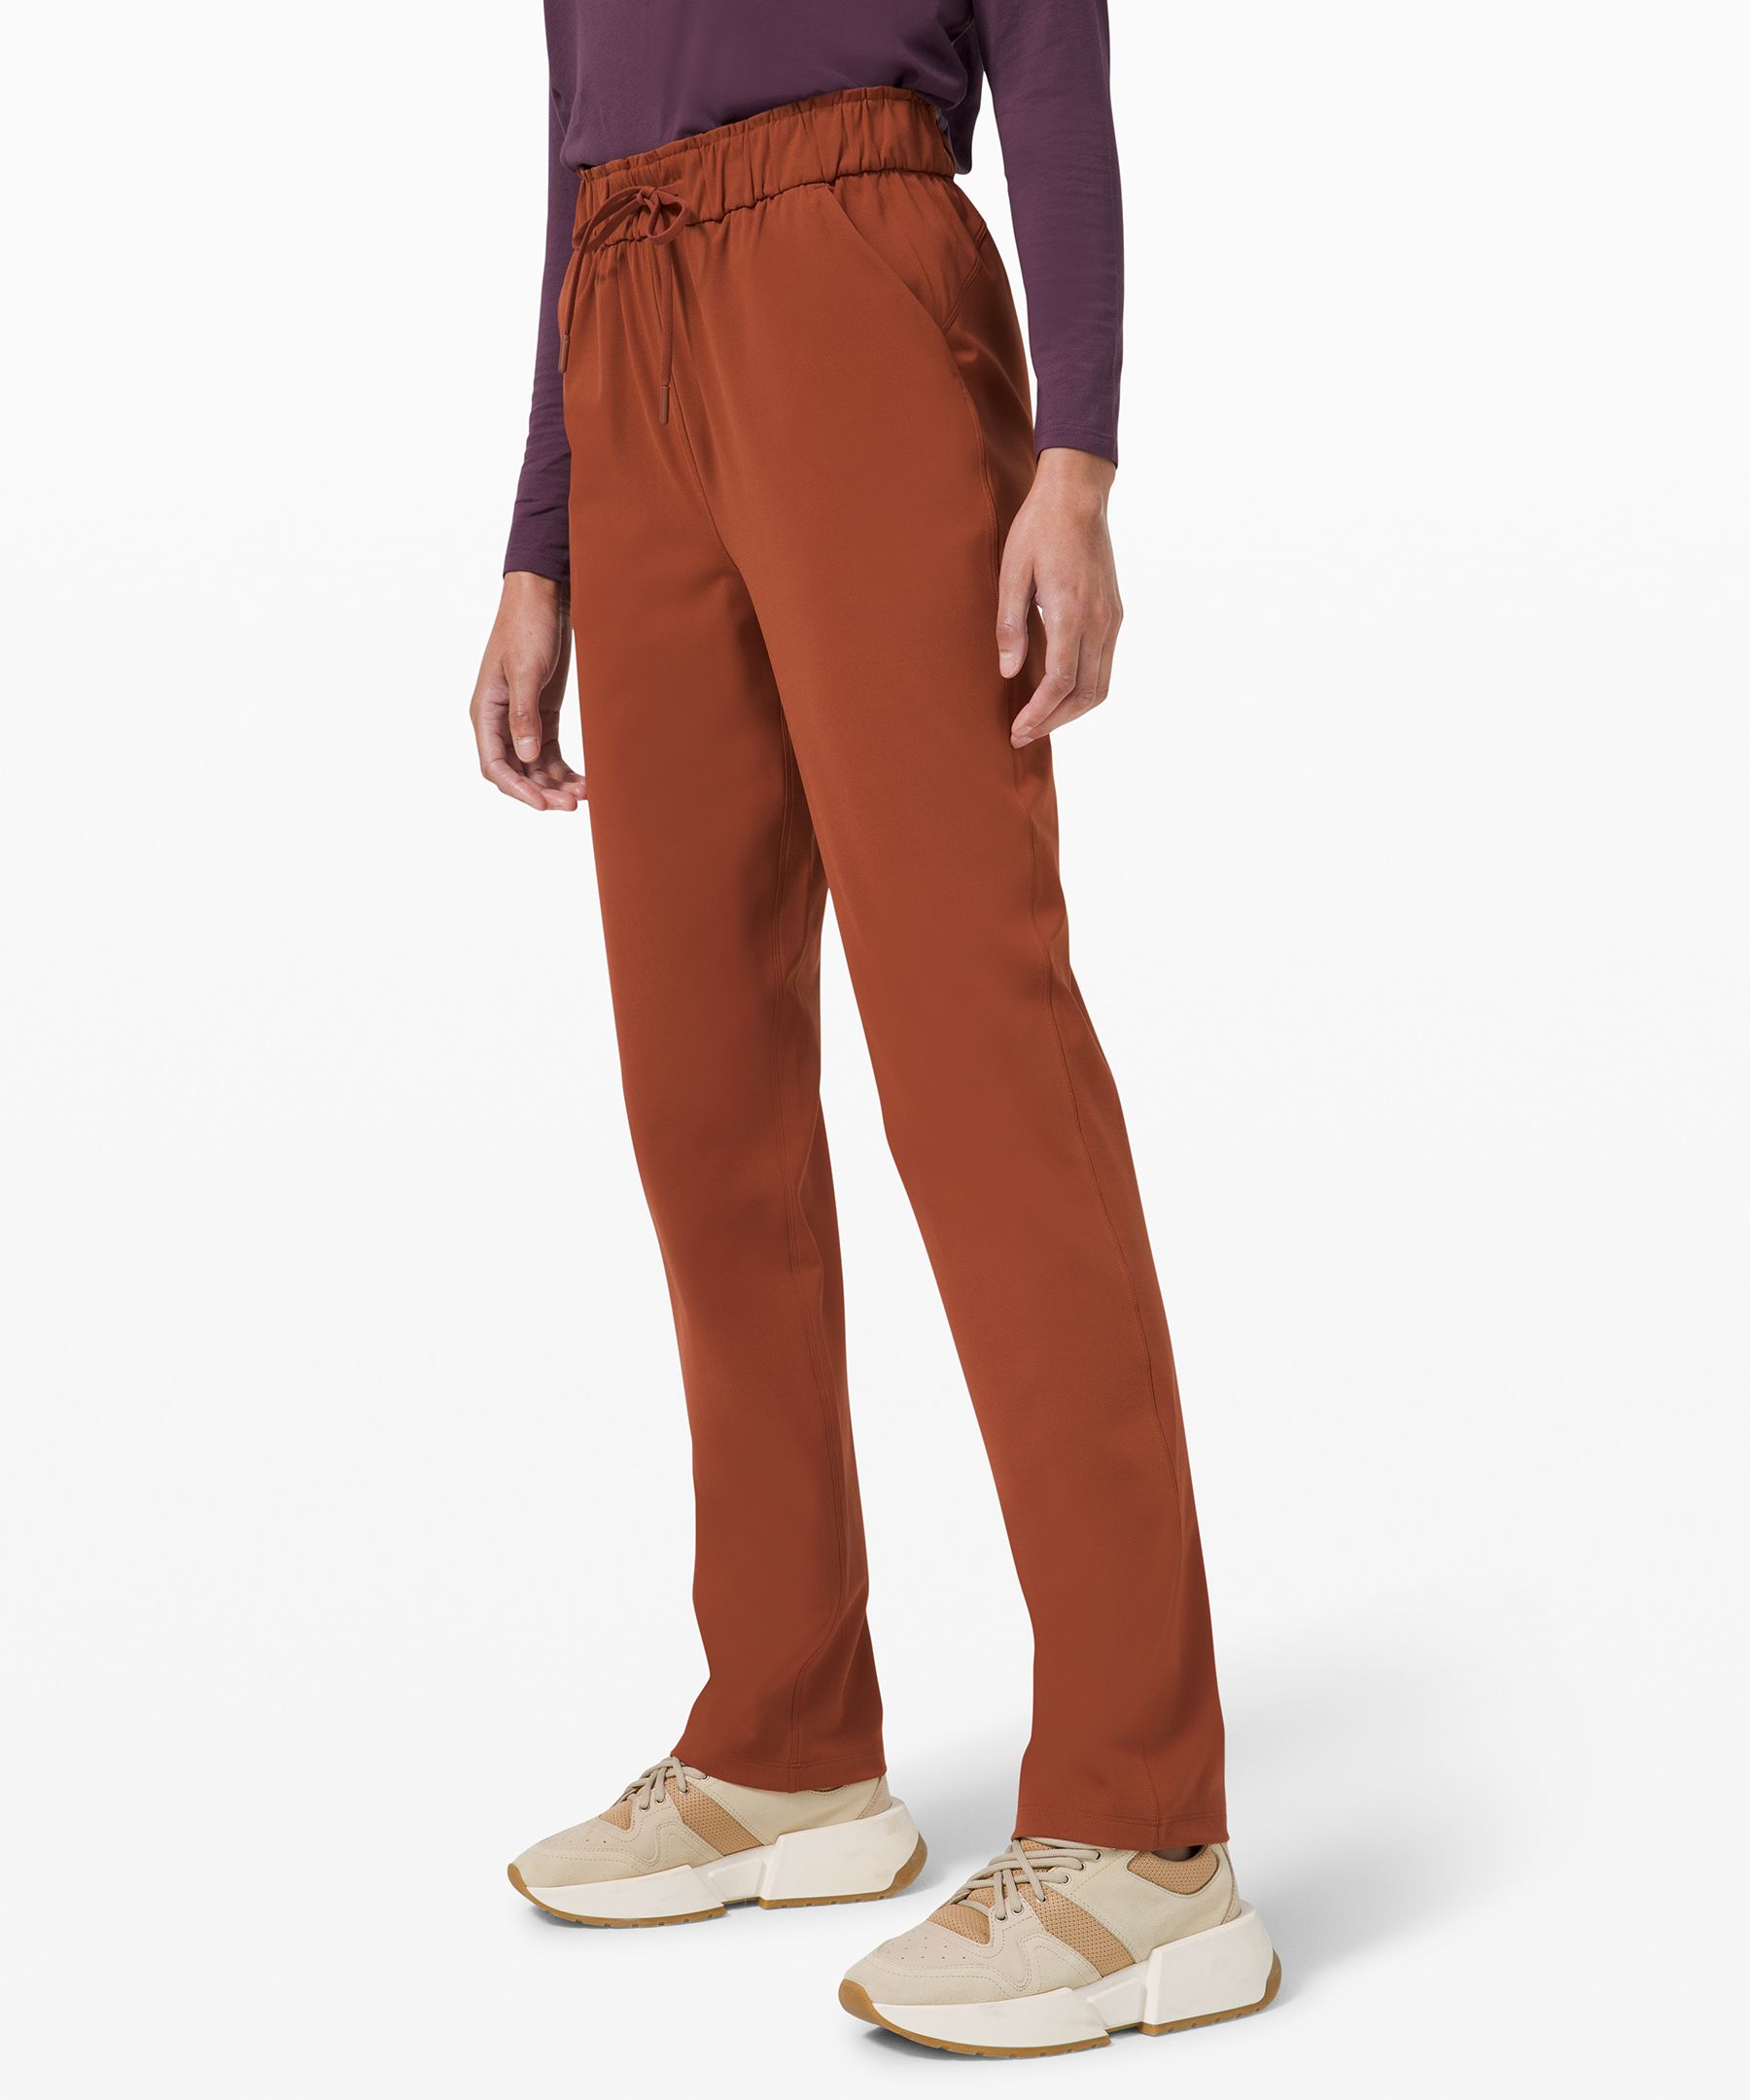 Lululemon Stretch High Rise Pant *full Length In Brown